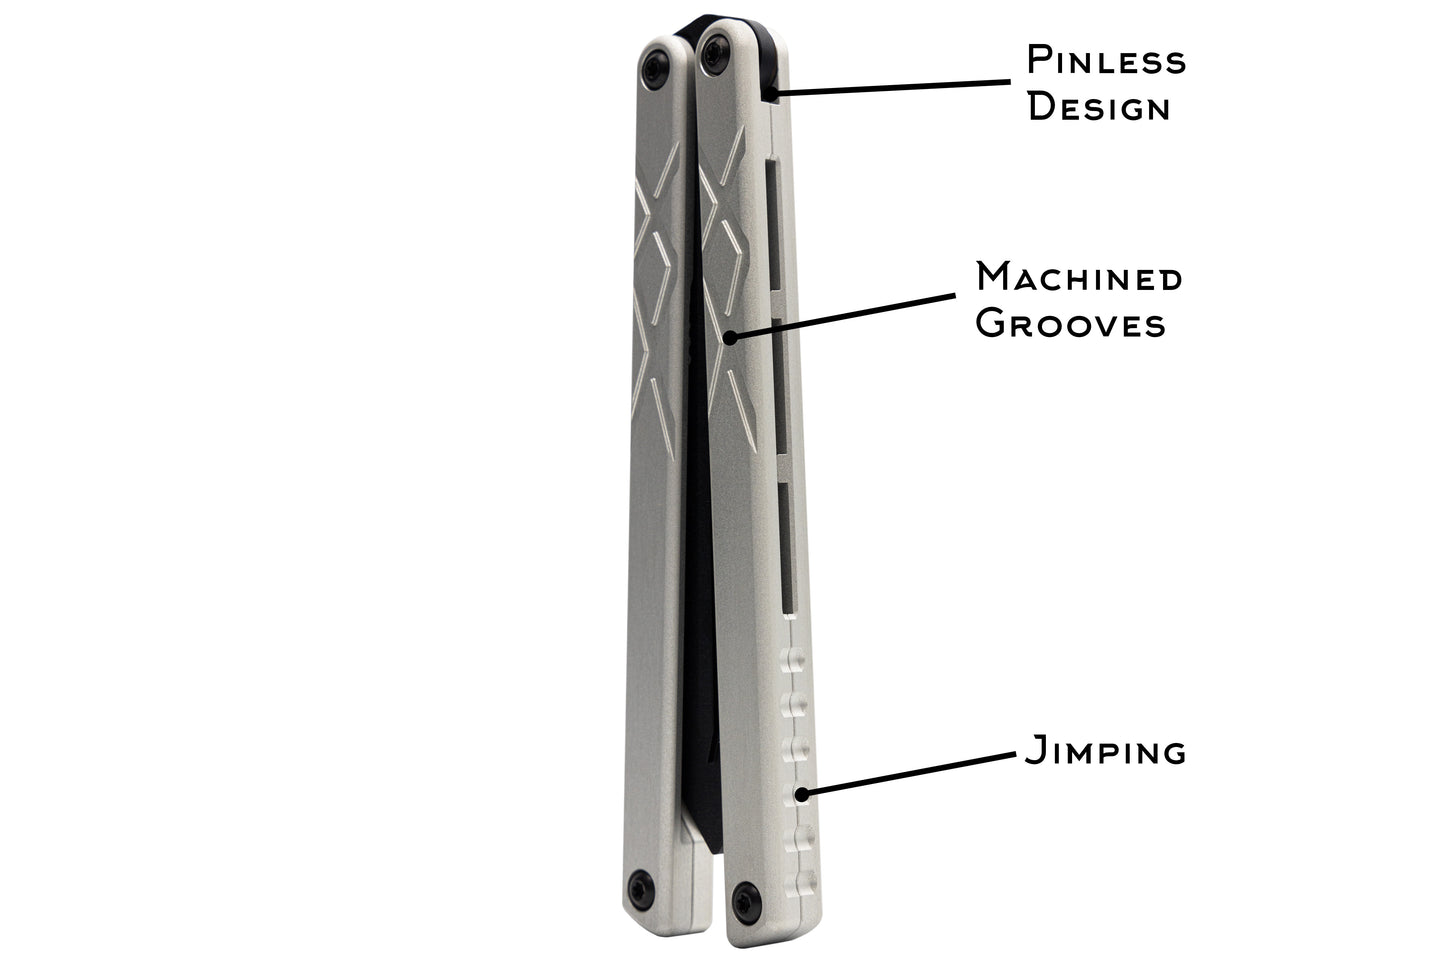 swordfish balisong butterfly knife trainer pinless design machined grooves jimping 